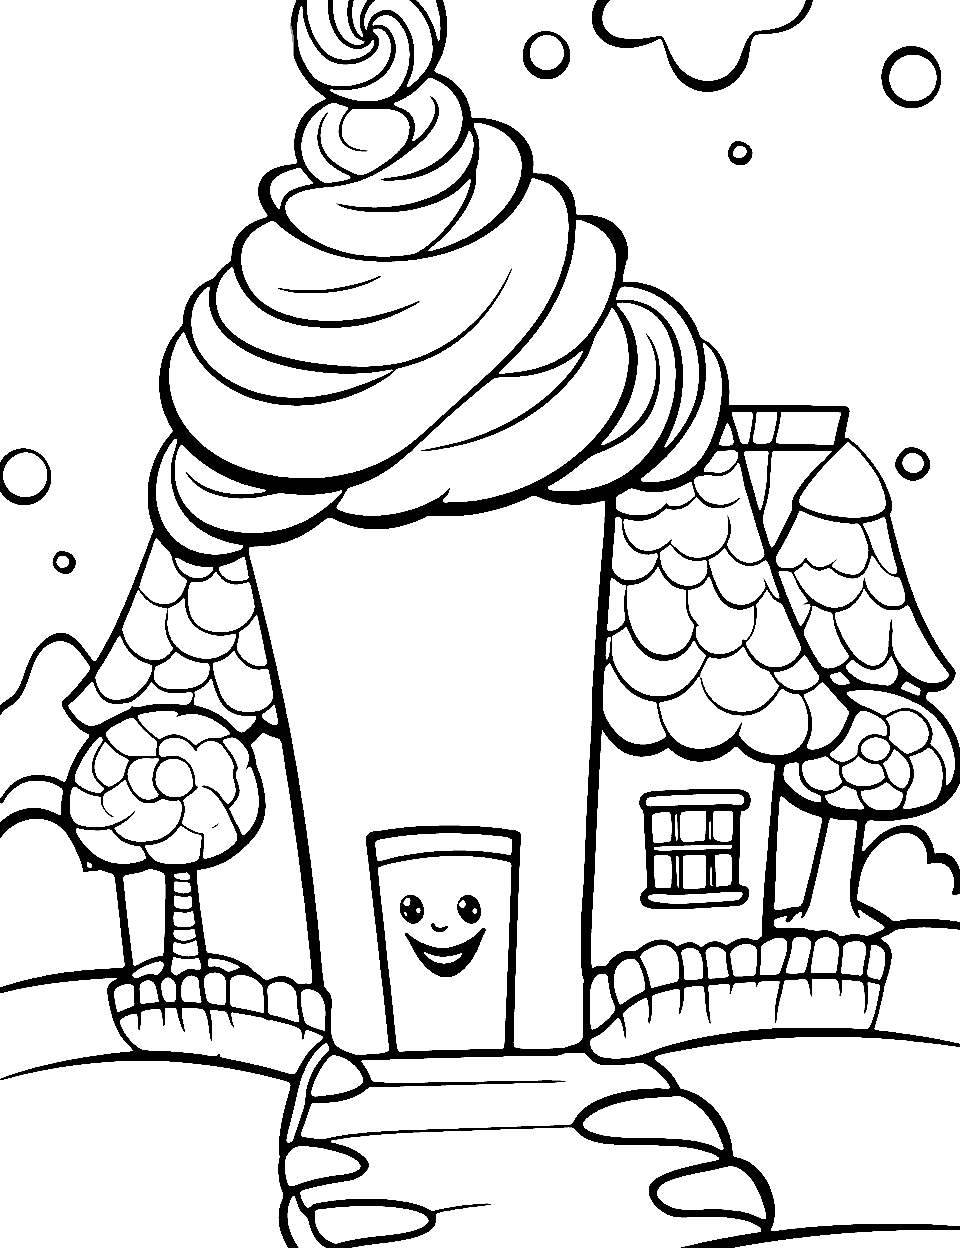 Candy Land Adventure Coloring Page - A colorful Candyland surroundings leading to a candy house.